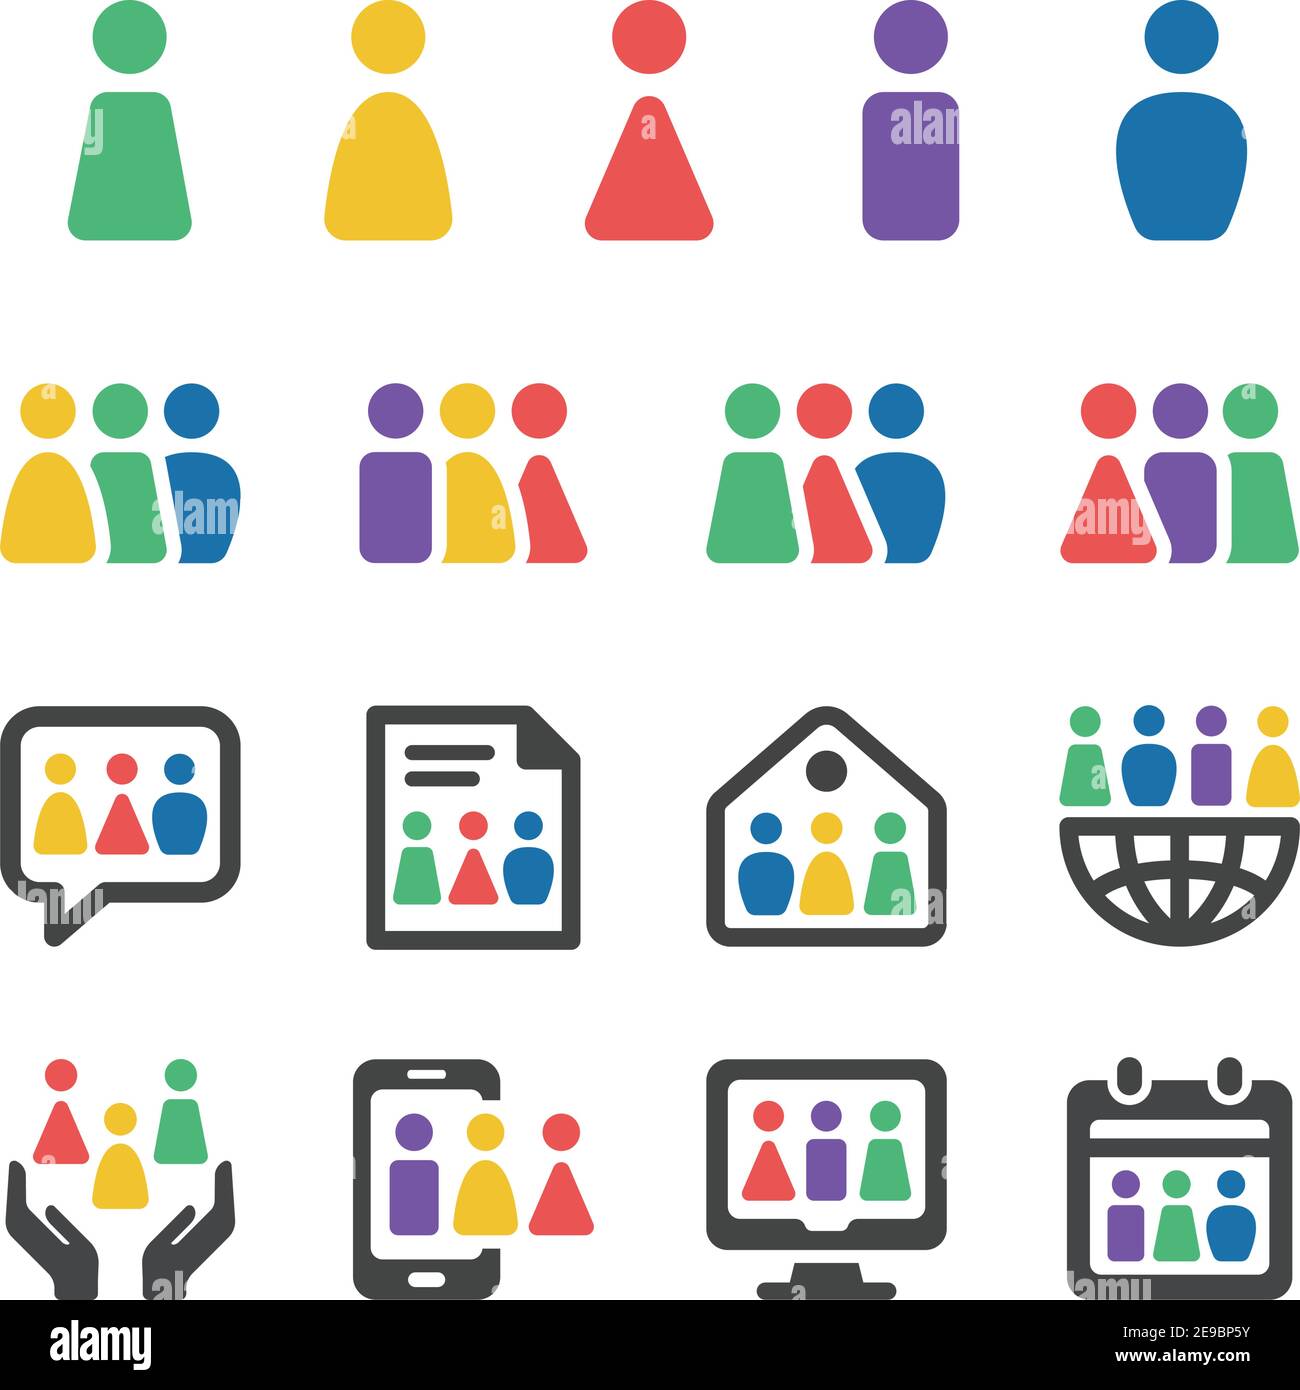 people and population icon set,vector and illustration Stock Vector